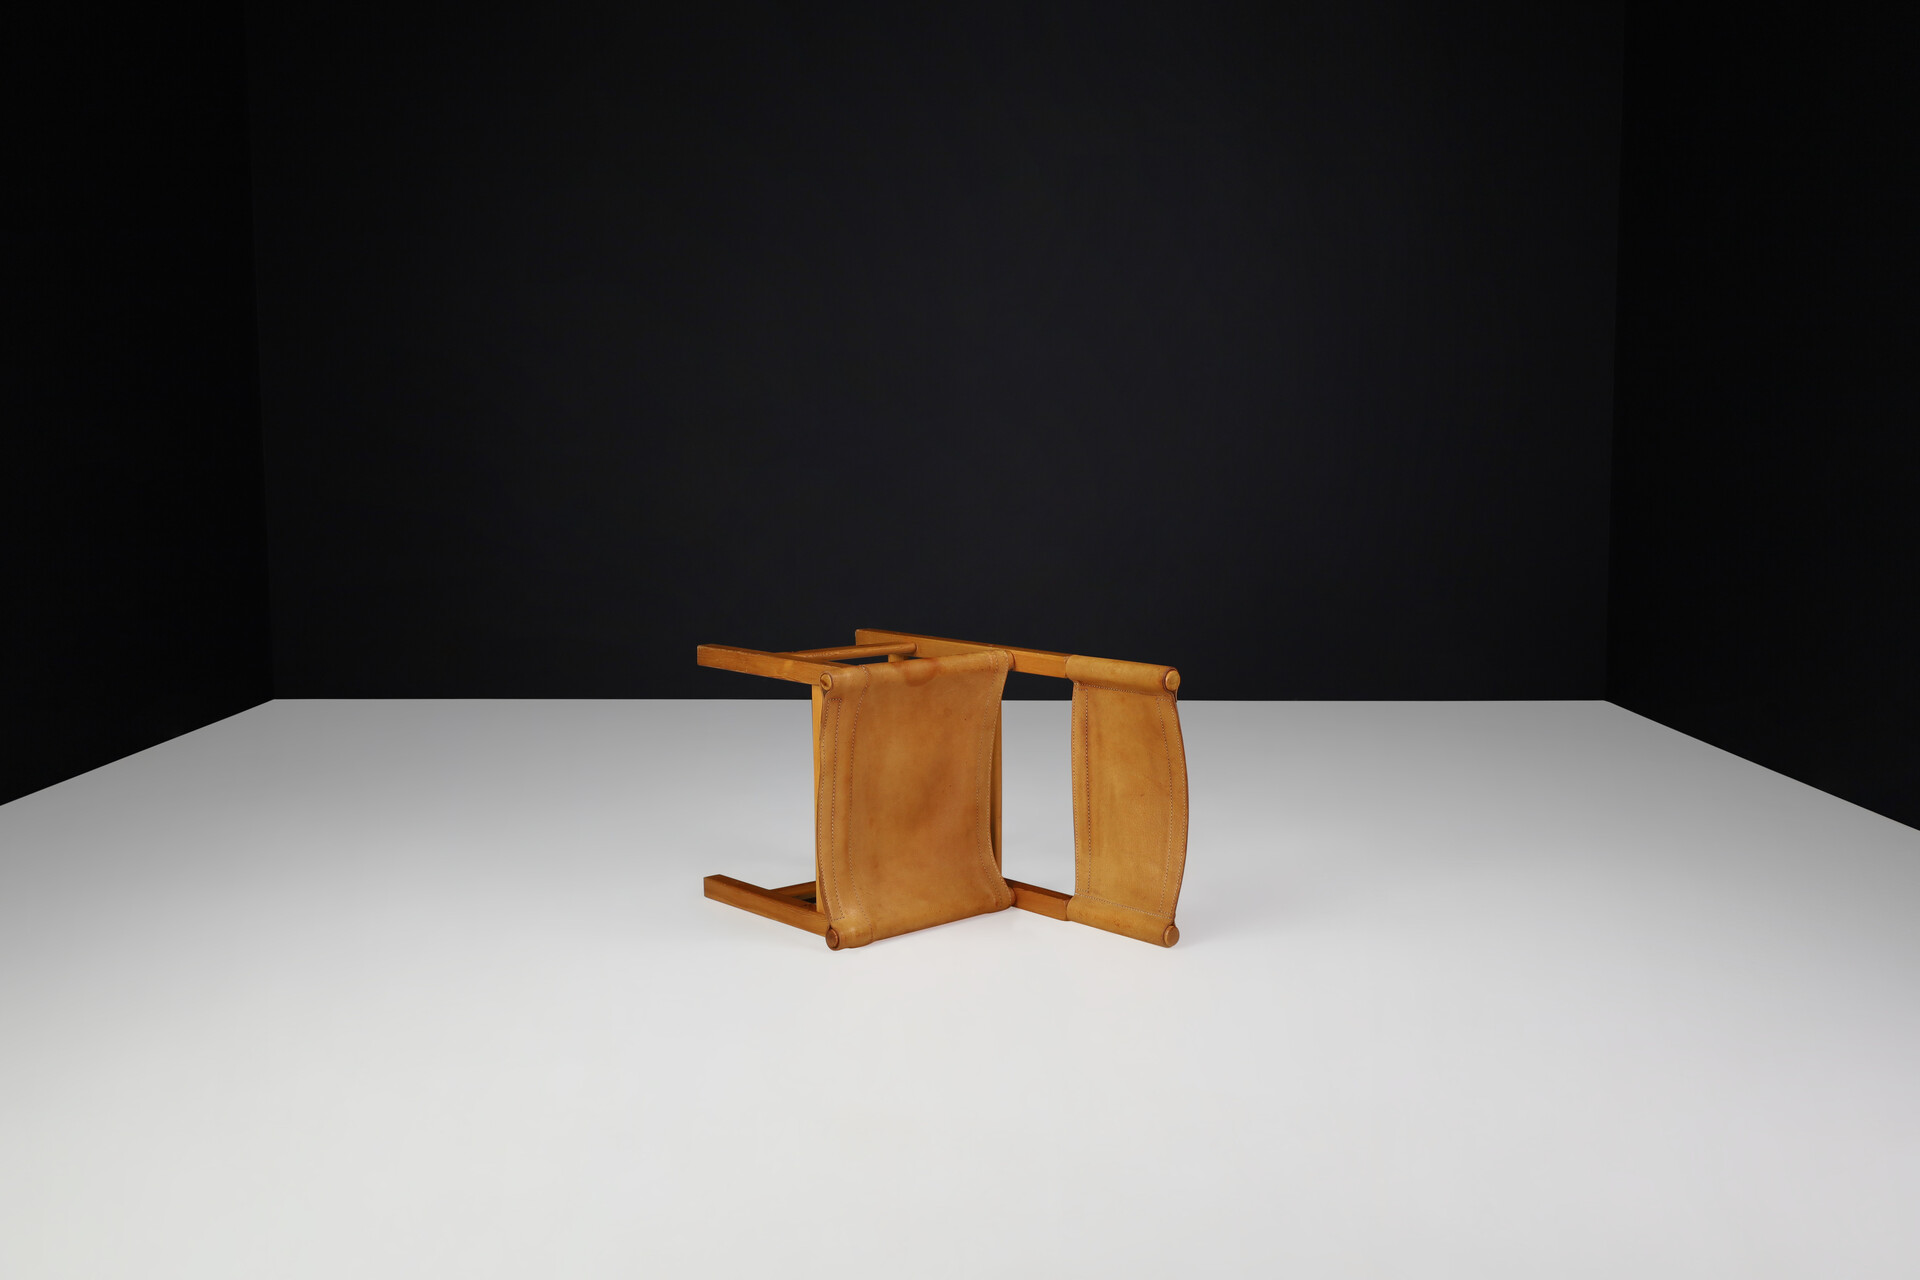 Scandinavian modern Dining Chairs in Pine and patinated cognac saddle Leather, Sweden 1970s Late-20th century